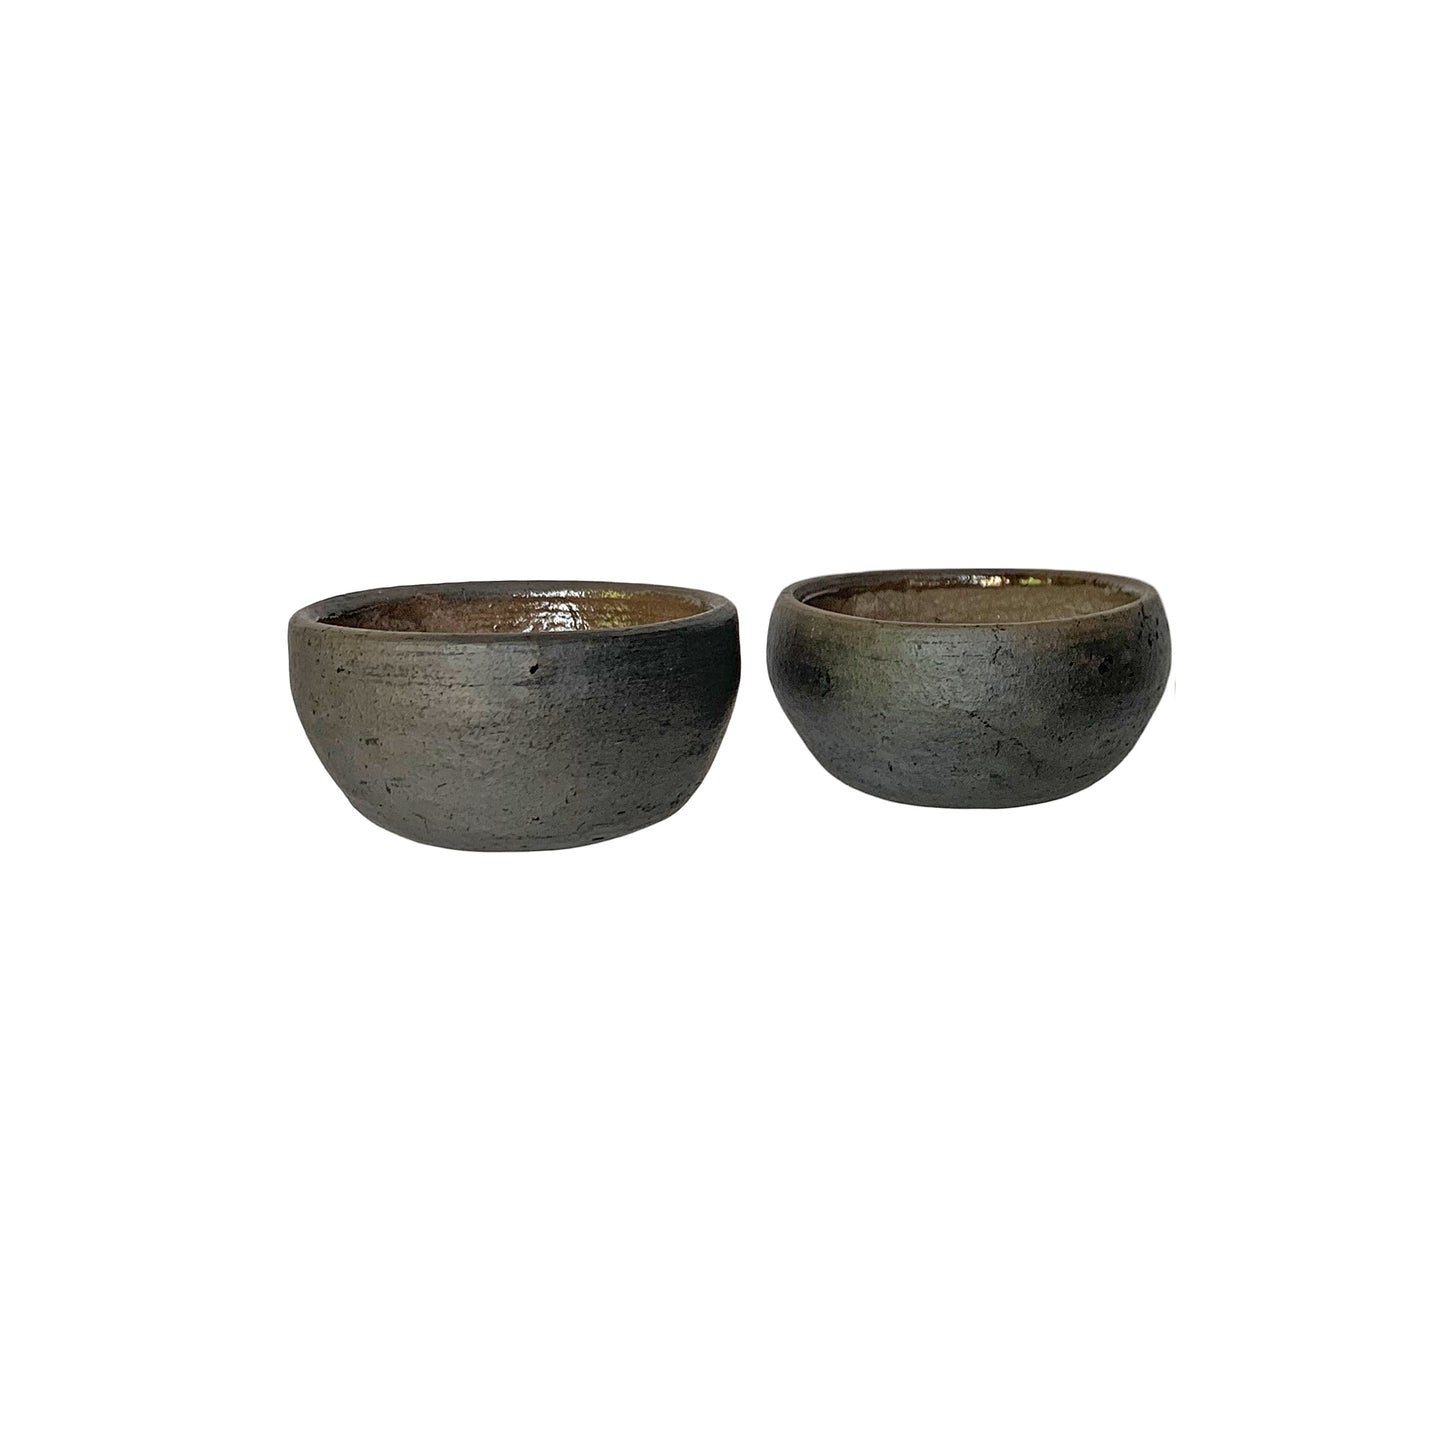 Burnt Clay Mezcal Copitas | Wide Mouth | Mezcal Glasses | Clay Cups | Handmade in Oaxaca, Mexico